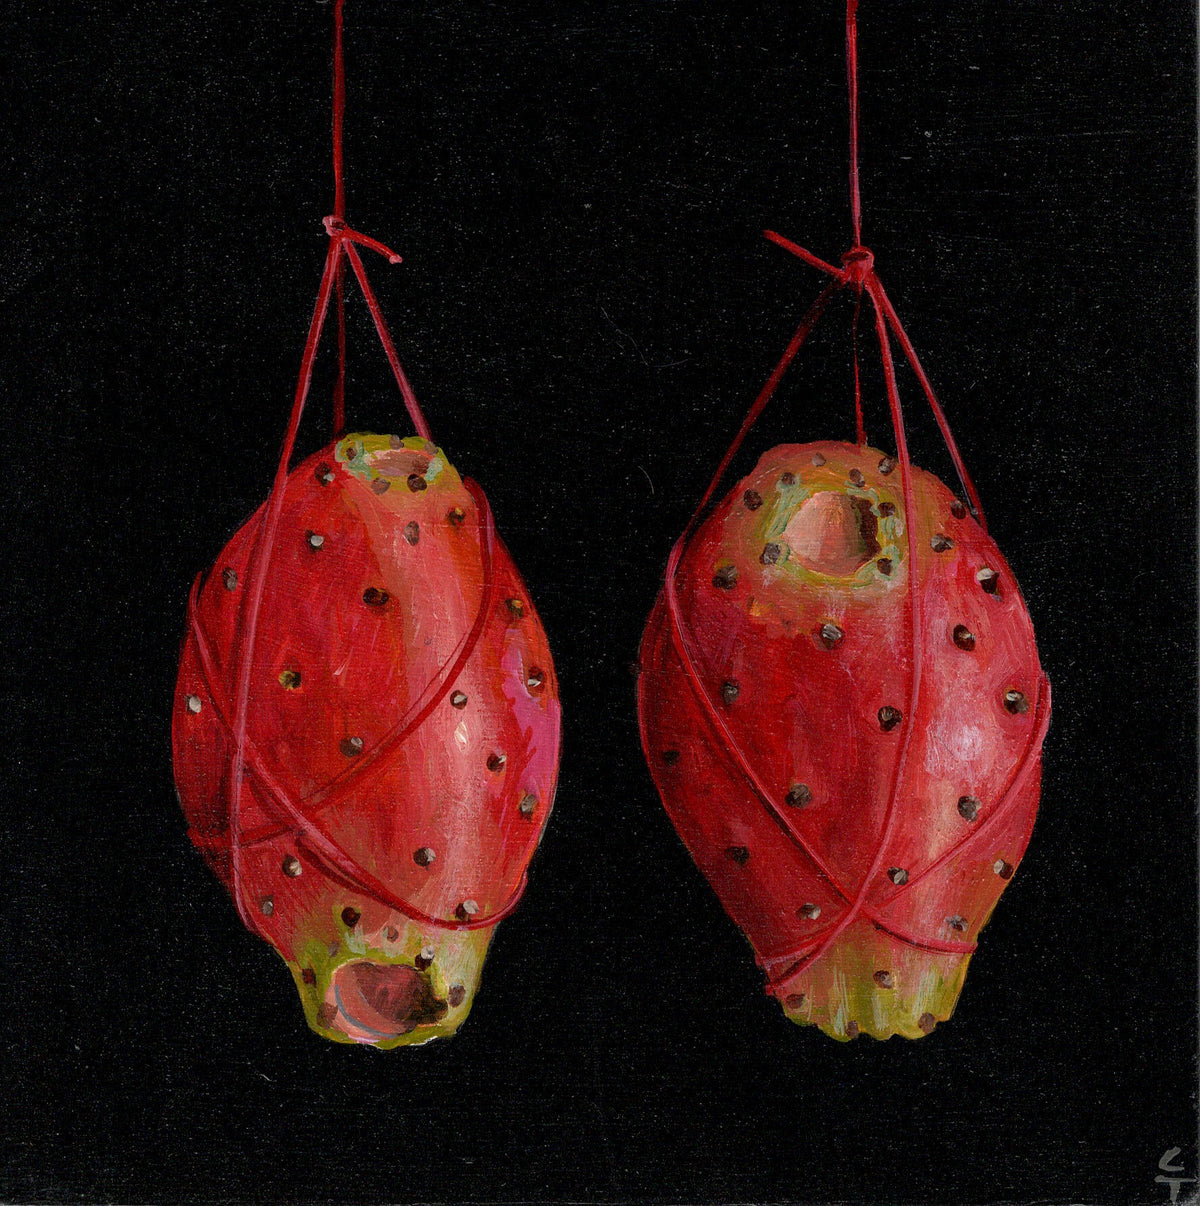 2 Hanging Prickly Pears